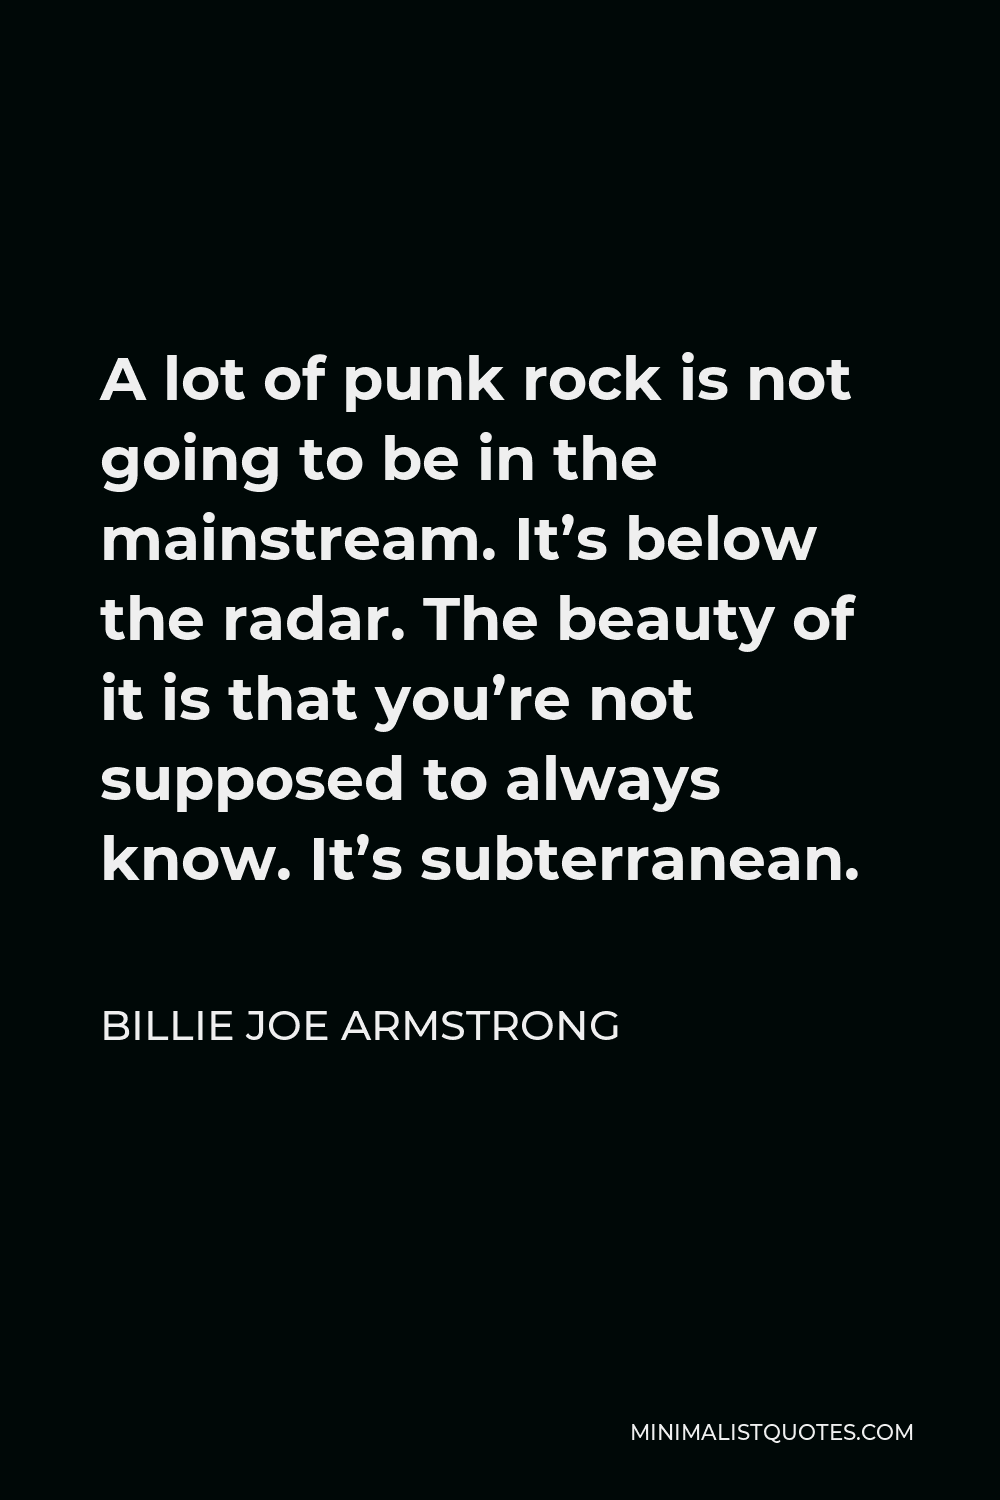 Billie Joe Armstrong Quote - A lot of punk rock is not going to be in the mainstream. It’s below the radar. The beauty of it is that you’re not supposed to always know. It’s subterranean.